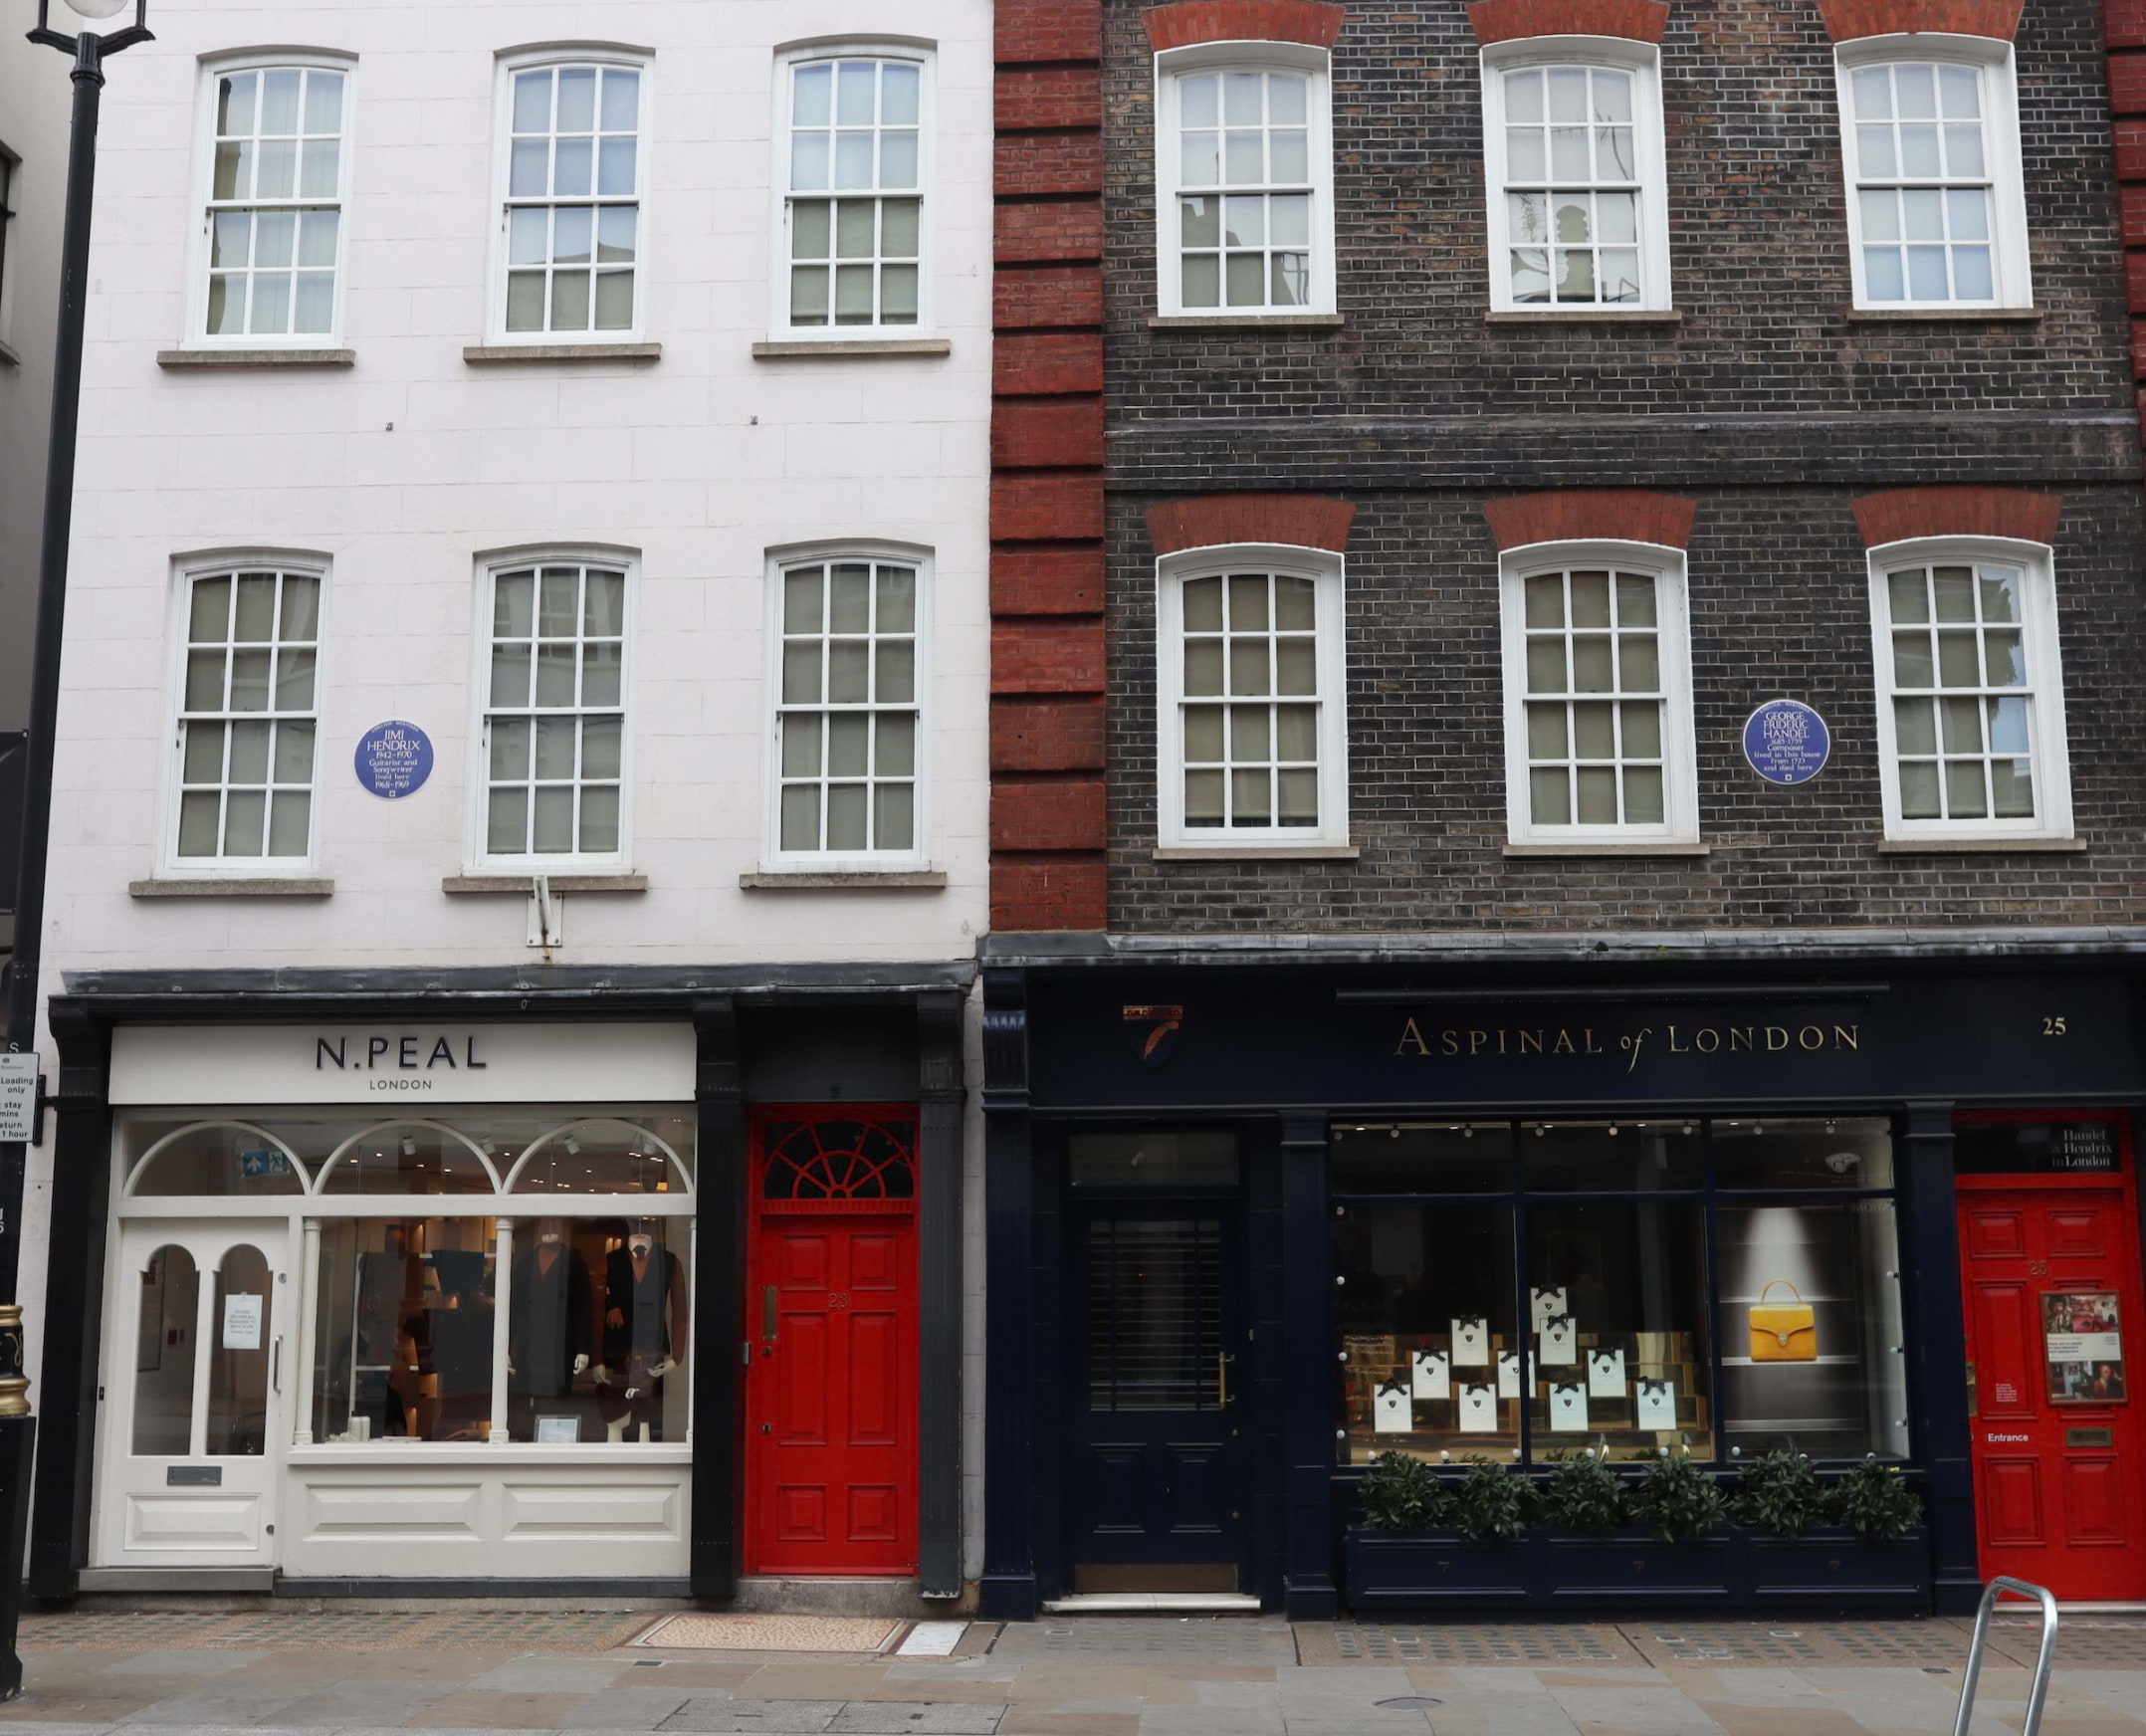 How to spend a day in Mayfair